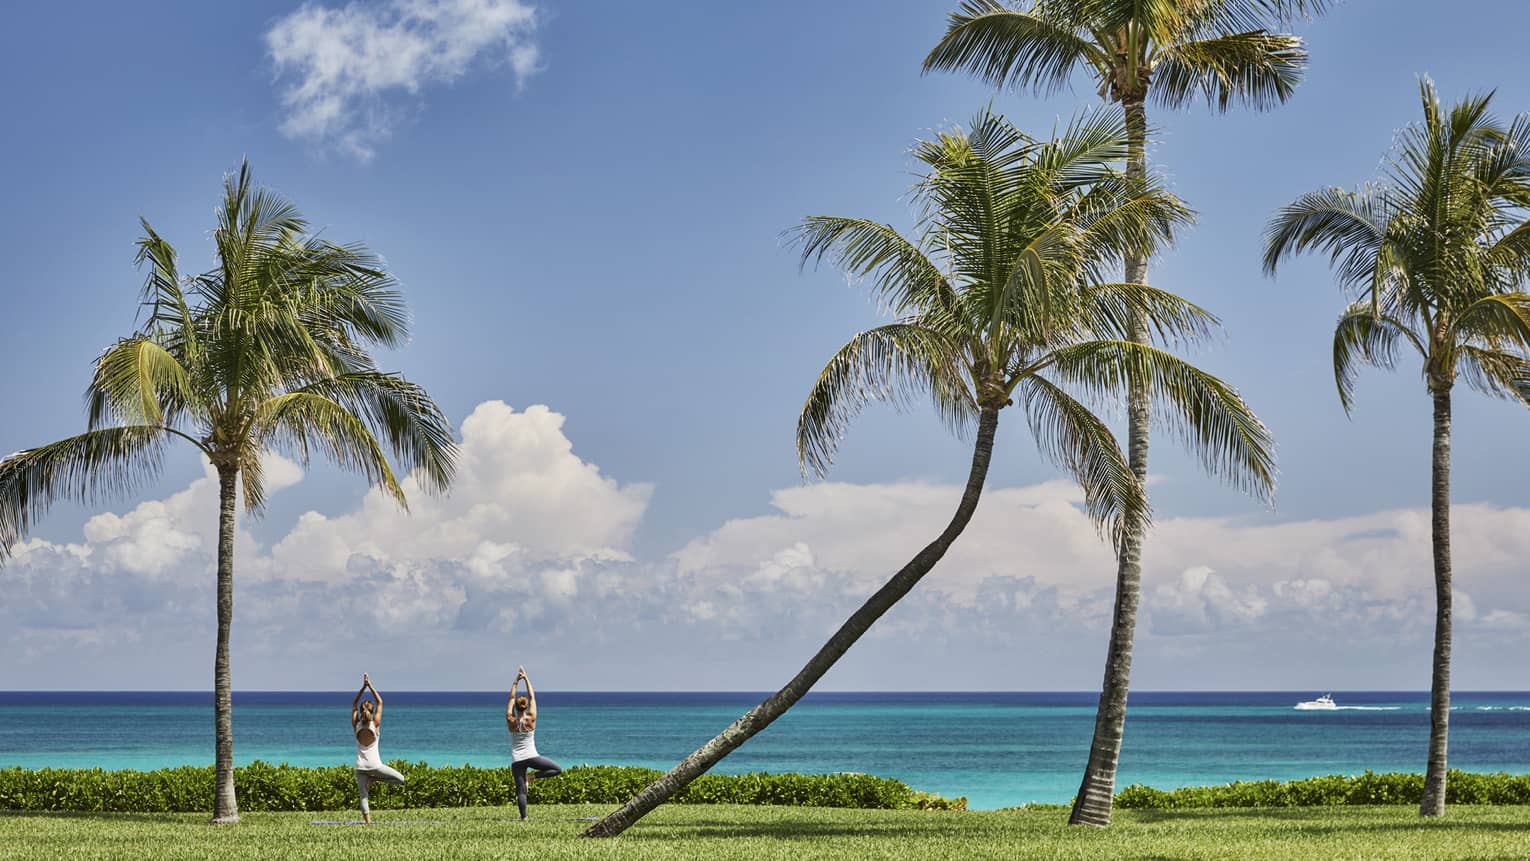 Two people face ocean, stand in yoga poses under tall palm trees